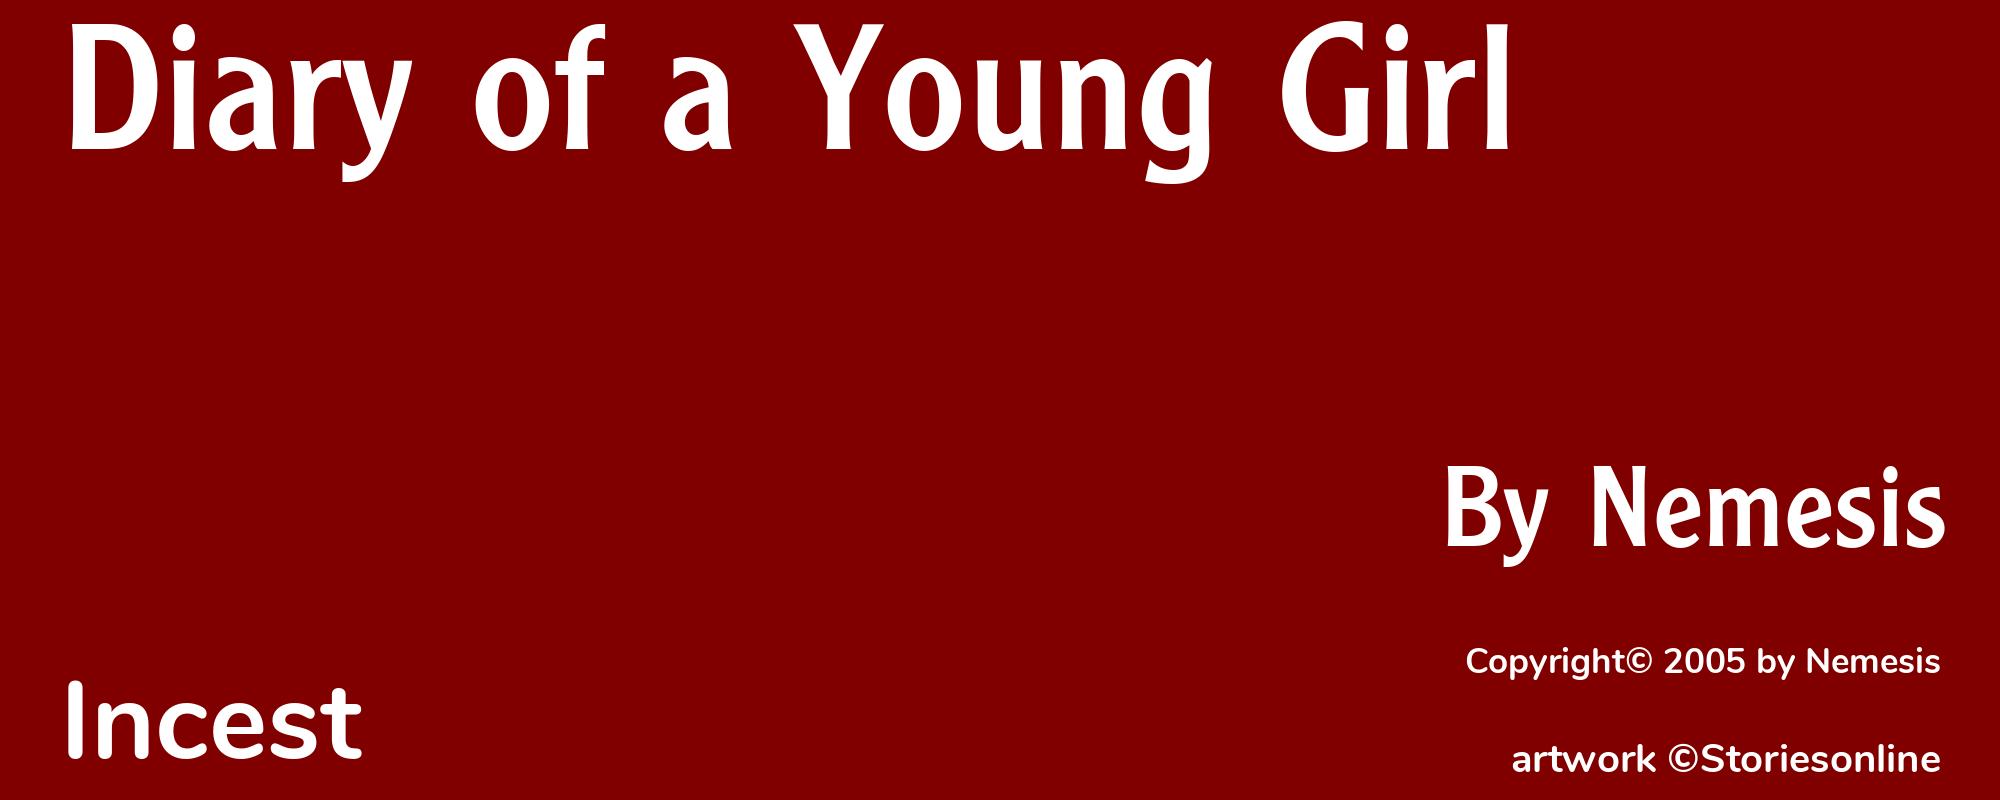 Diary of a Young Girl - Cover